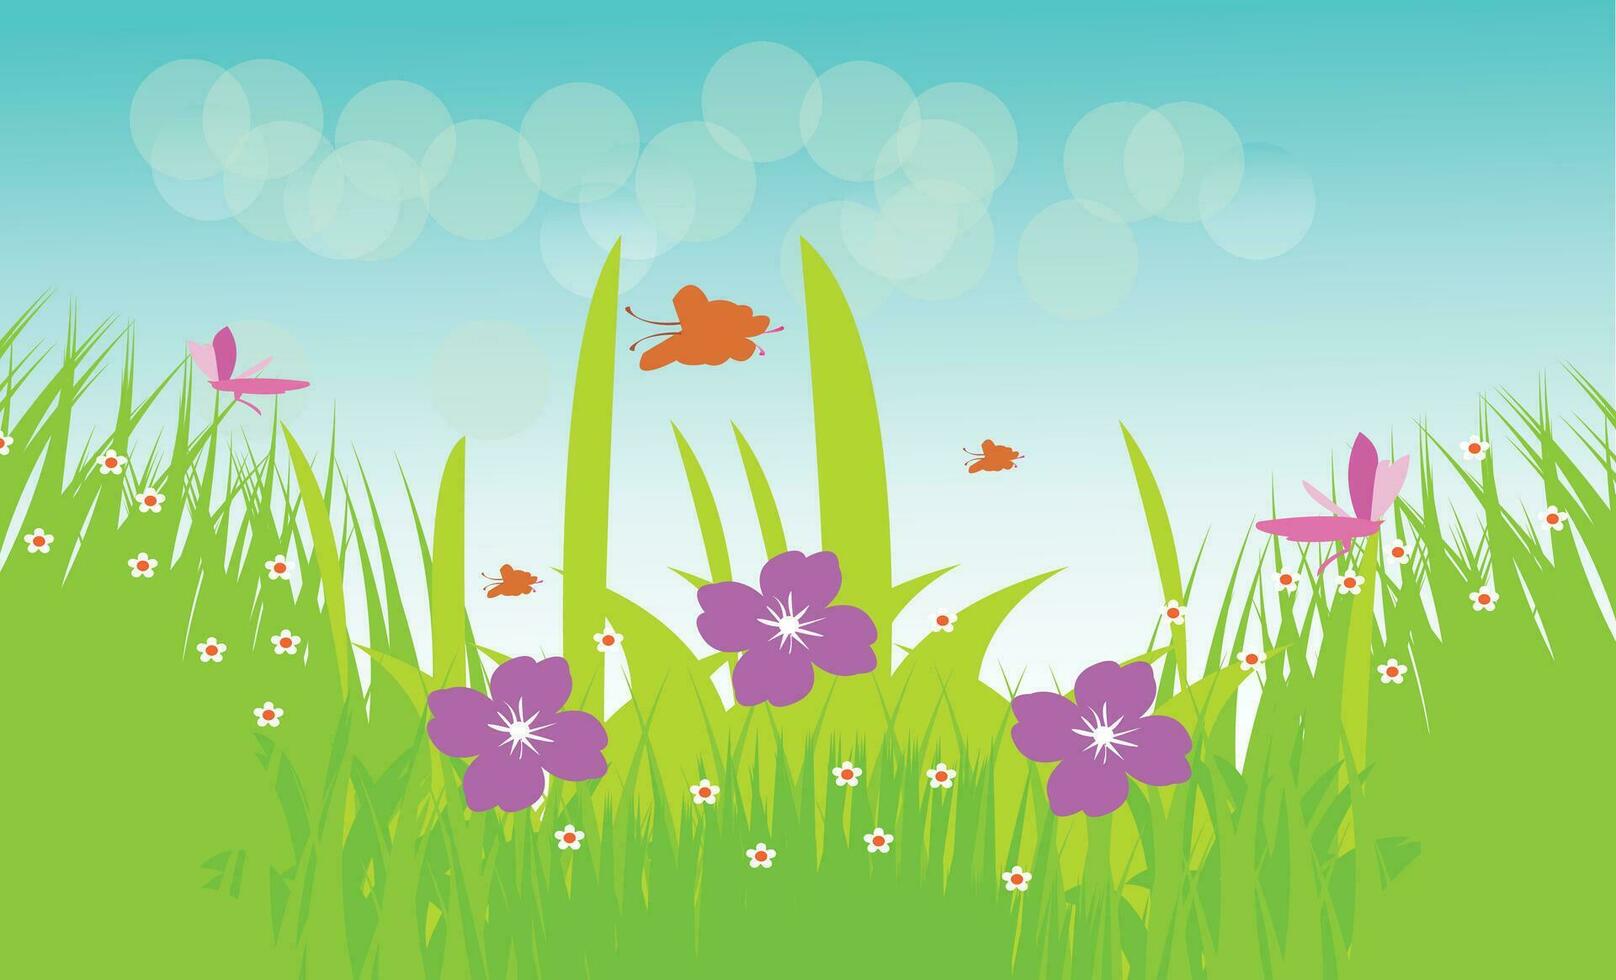 Vector landscape spring background with flowers.